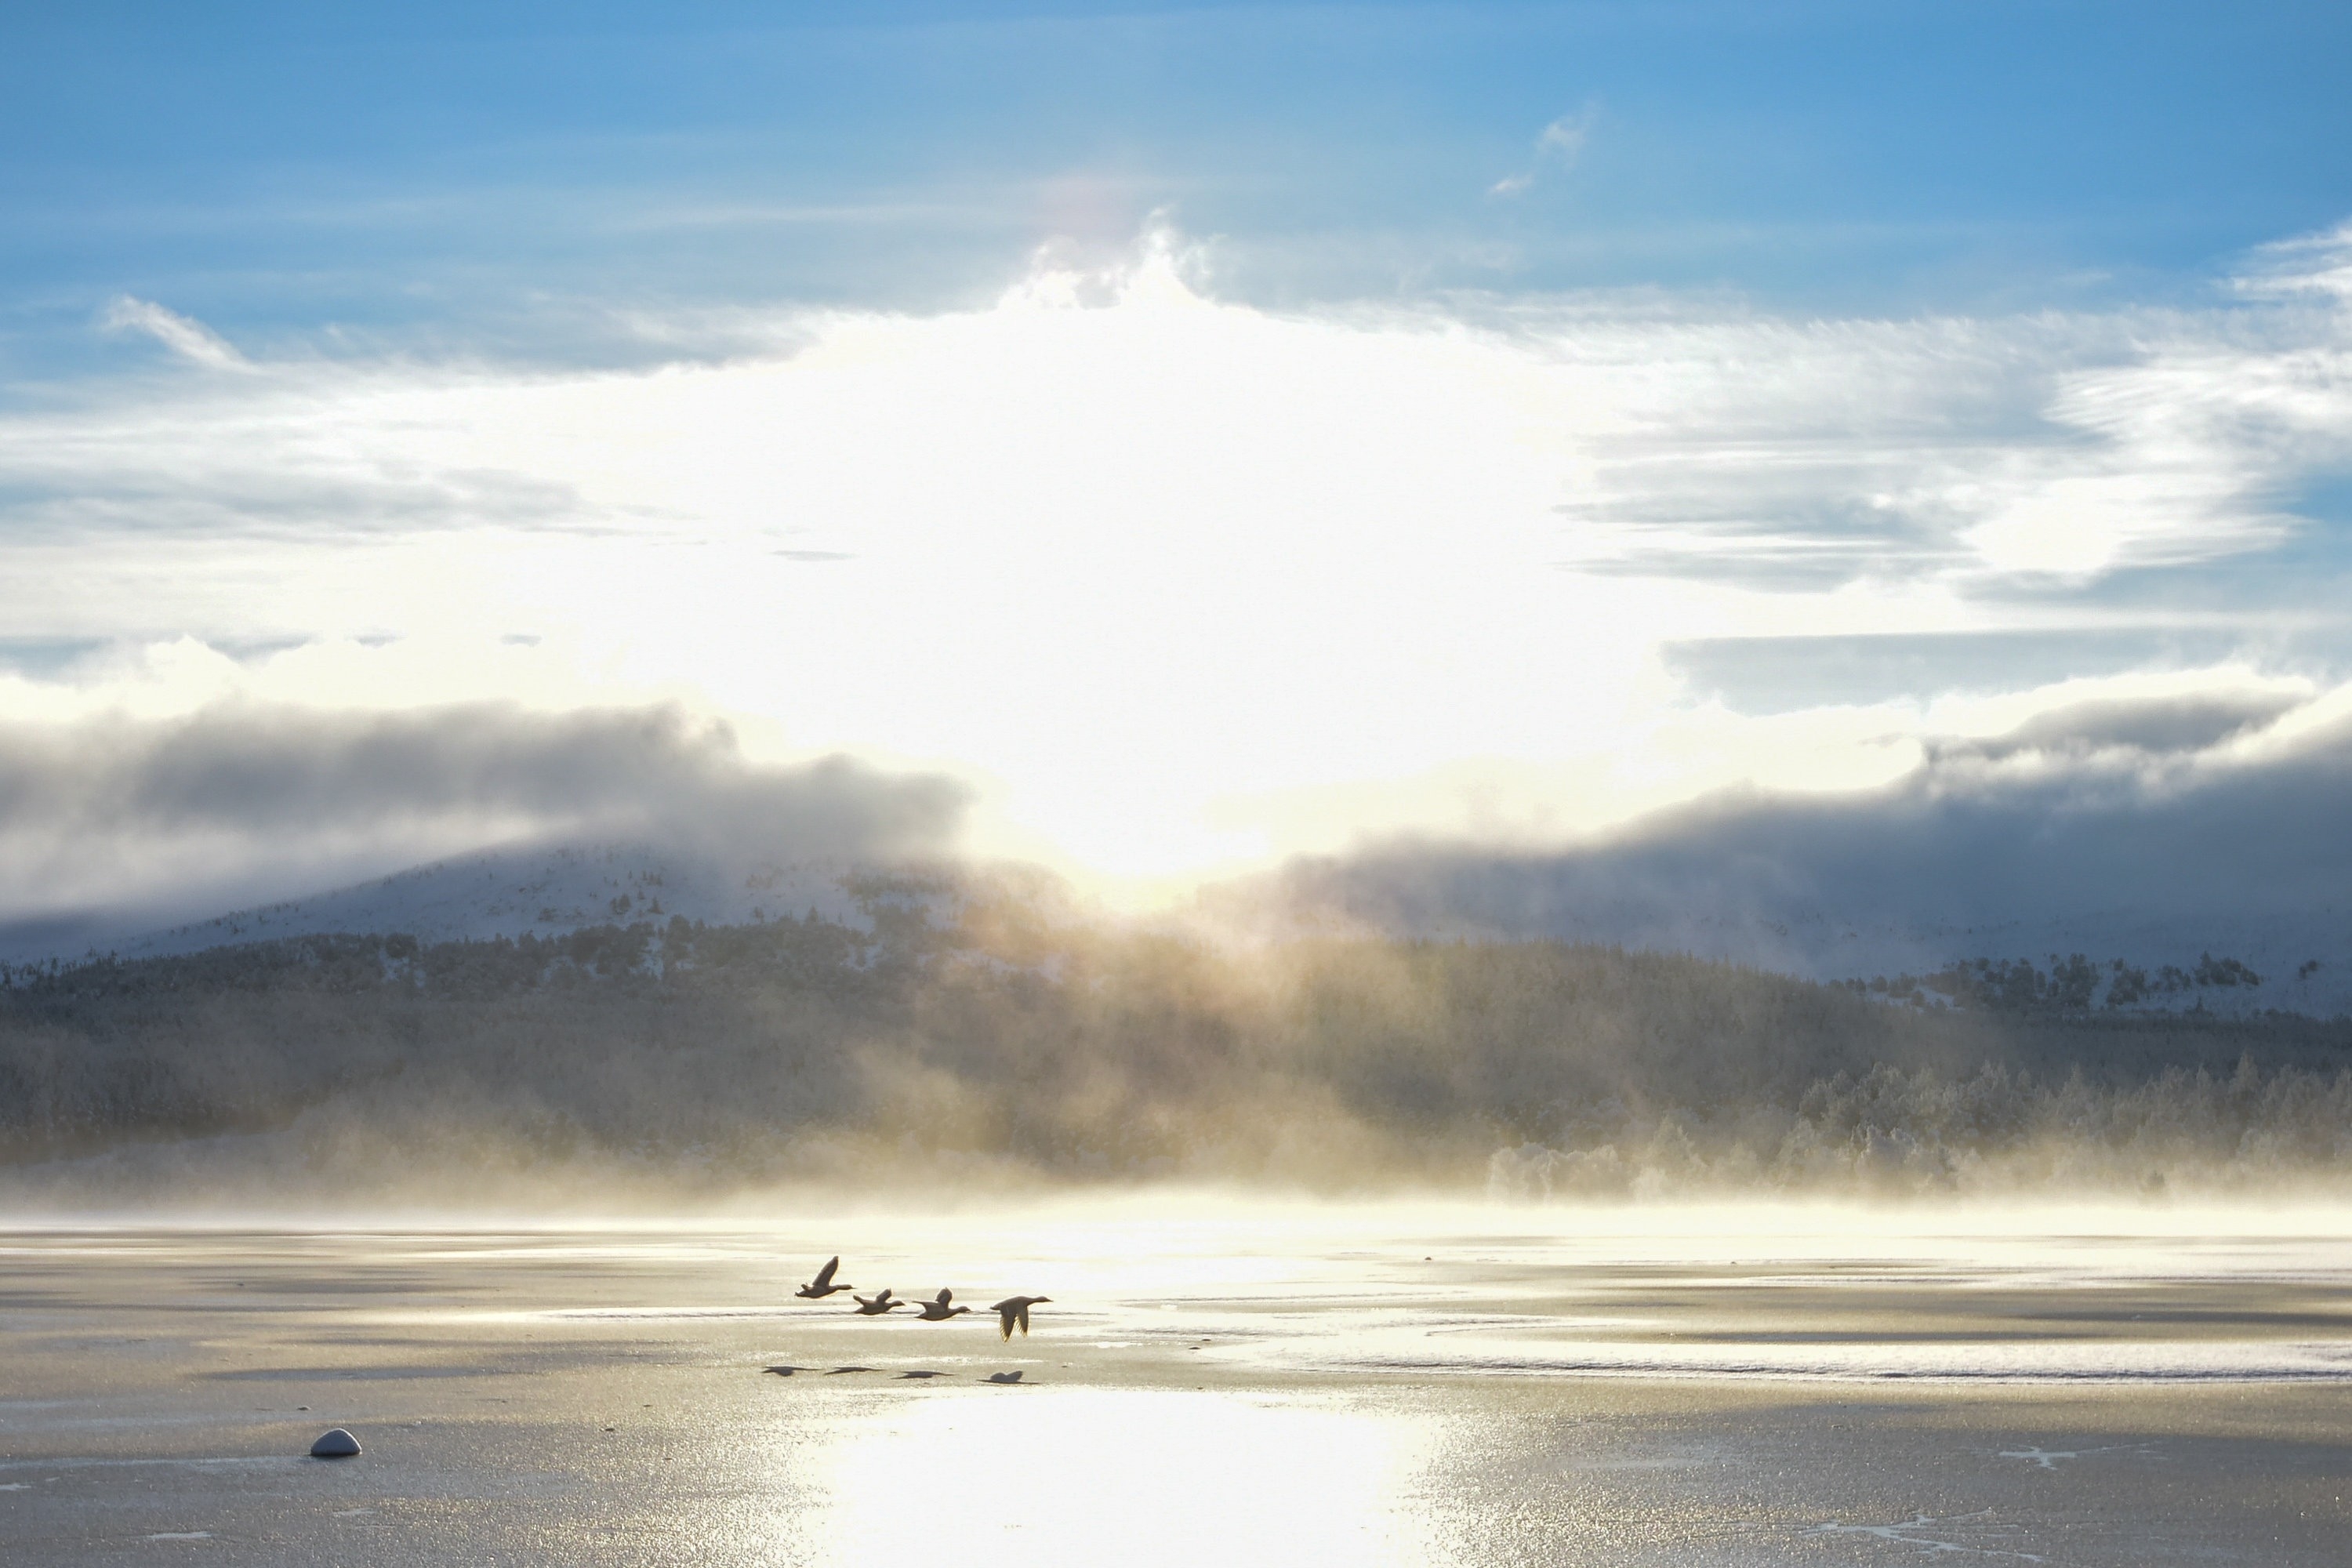 Ducks are seen flying over a partially frozen Loch Morlich near Aviemore, Scotland on December 14 2015. Last night, Sunday, Scotland's coldest temperature for this Winter was recorded in Dalwhinnie at -8.7C. Up to 15cm of snow fell in Aviemore overnight and local schools were closed.